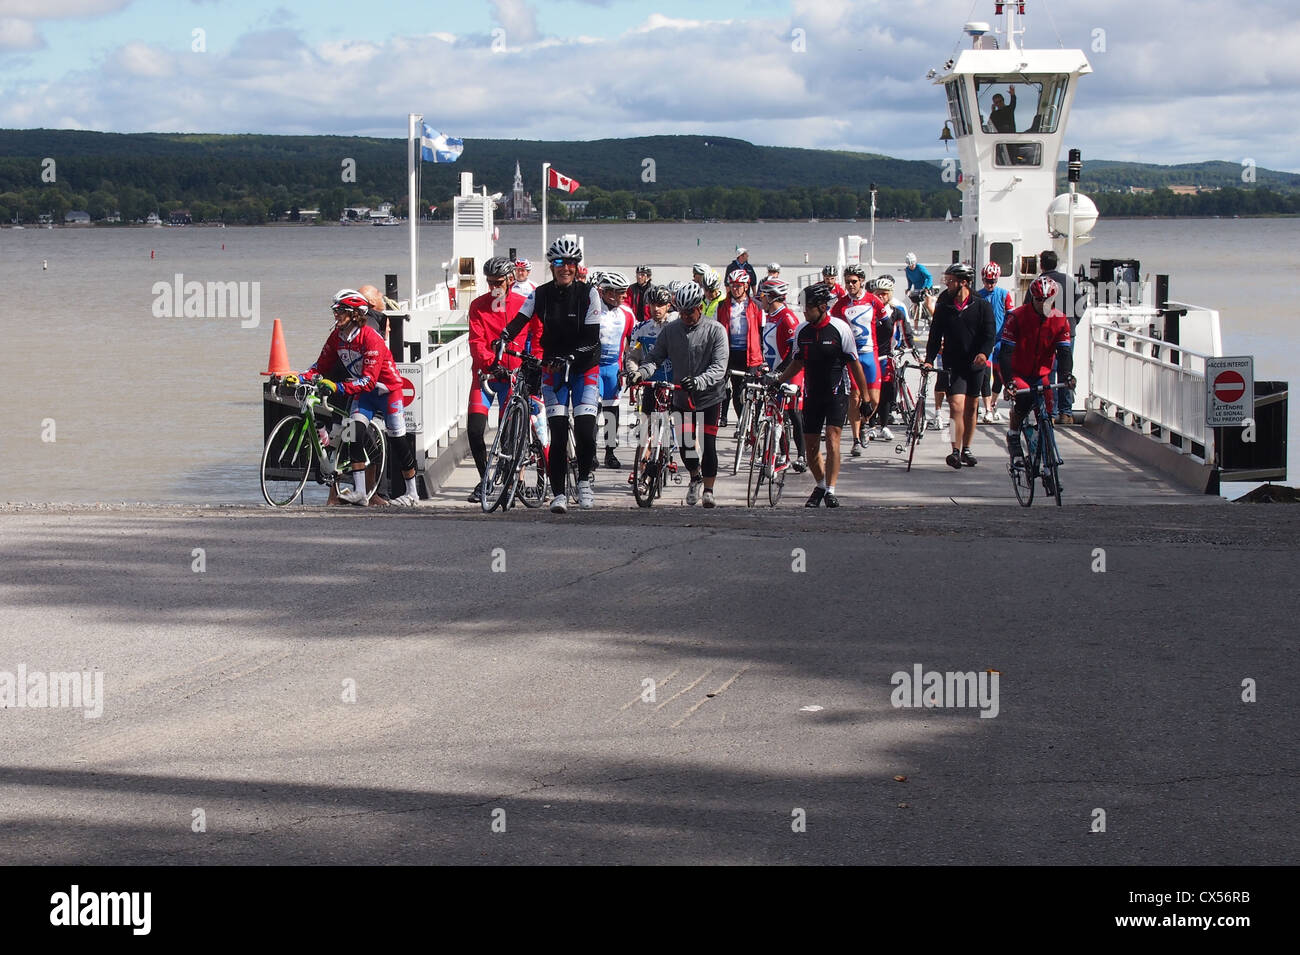 People disembarking from a ferry boat Stock Photo